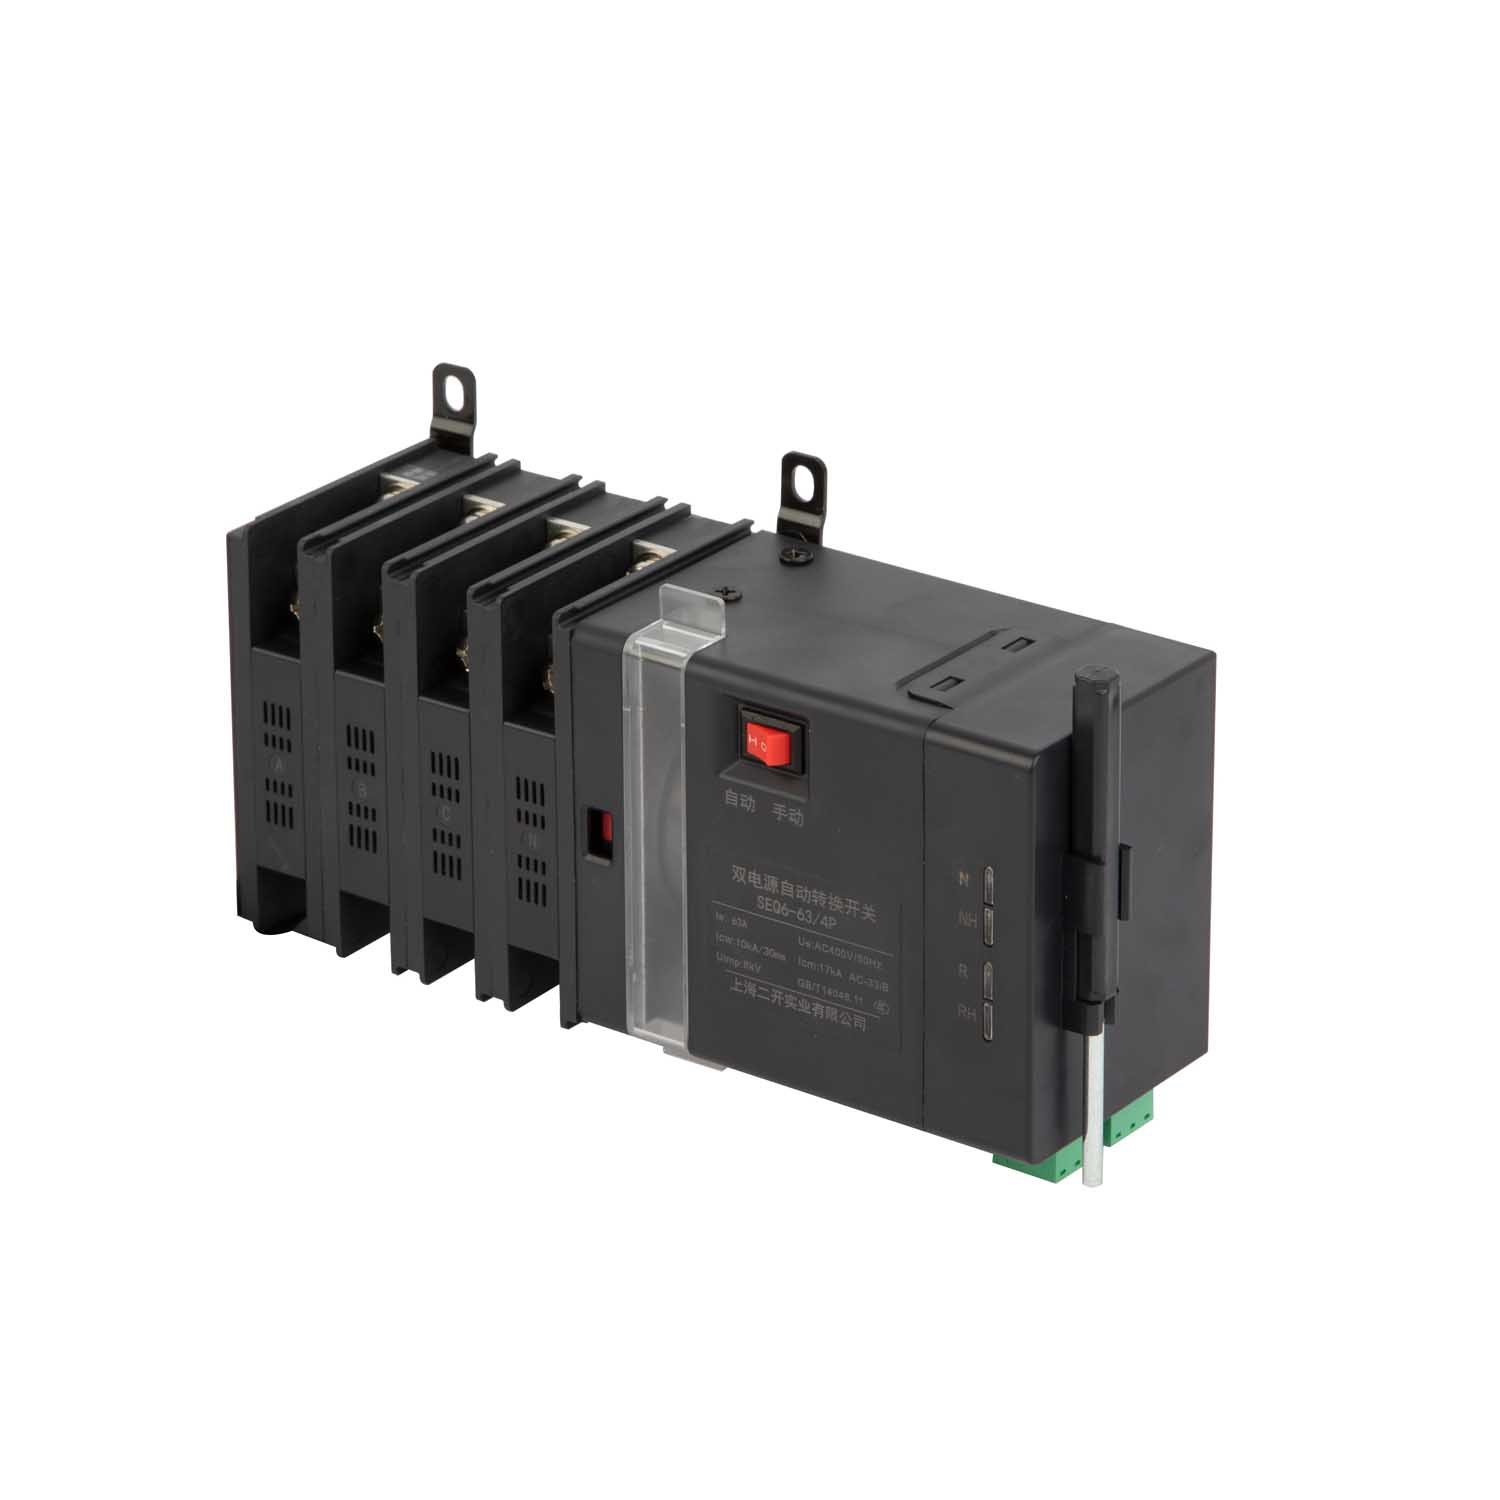 Factory Price ATS Automatic Change Over Switch 630A 2p Generator